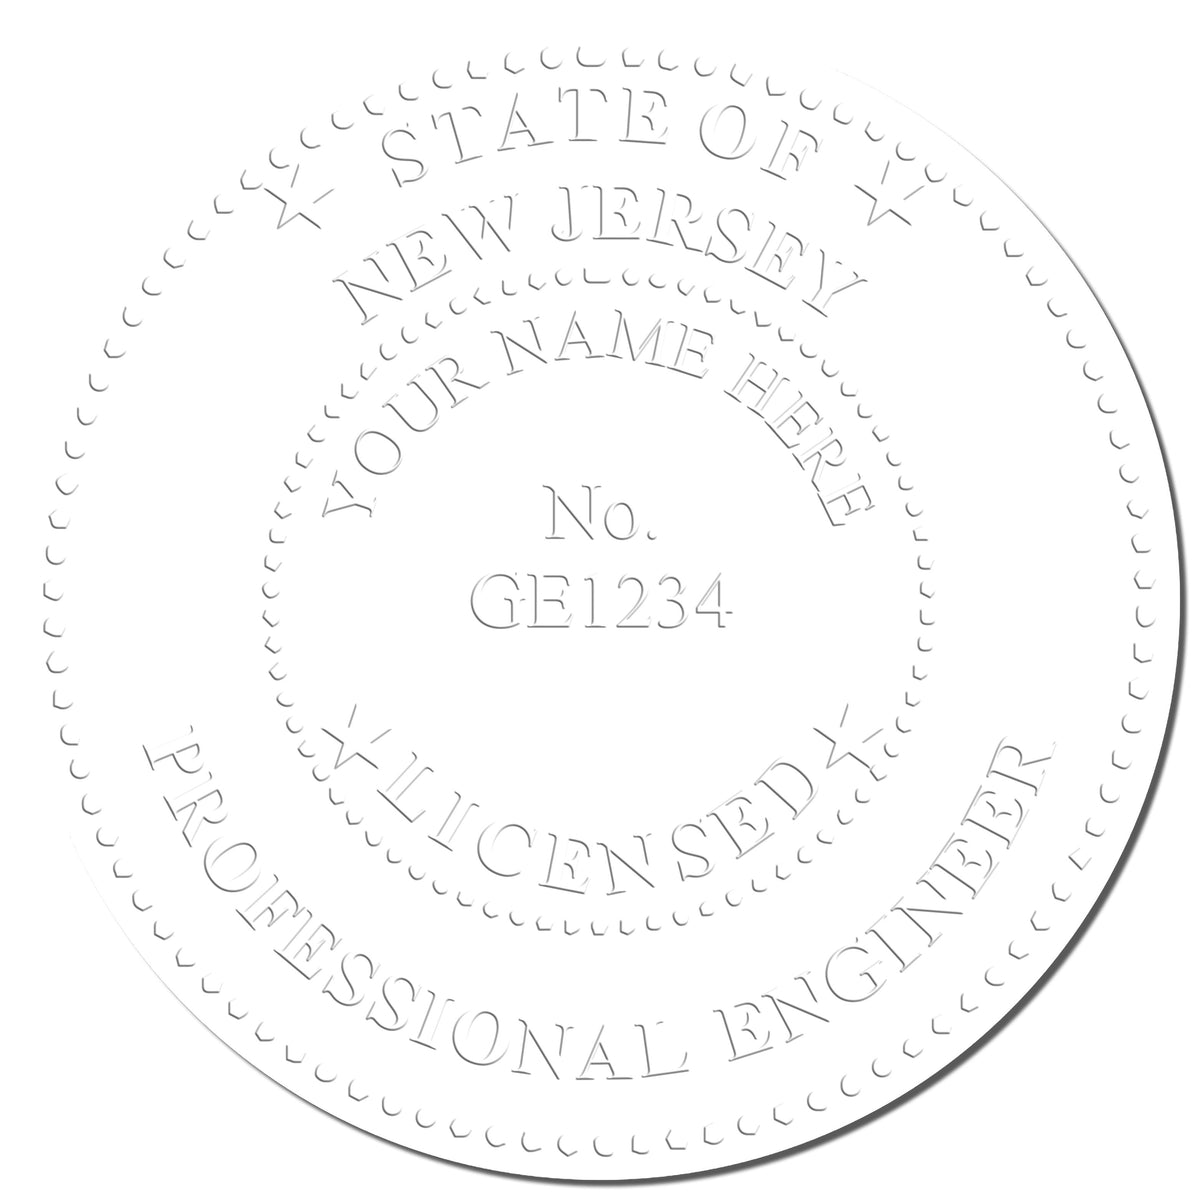 This paper is stamped with a sample imprint of the Gift New Jersey Engineer Seal, signifying its quality and reliability.